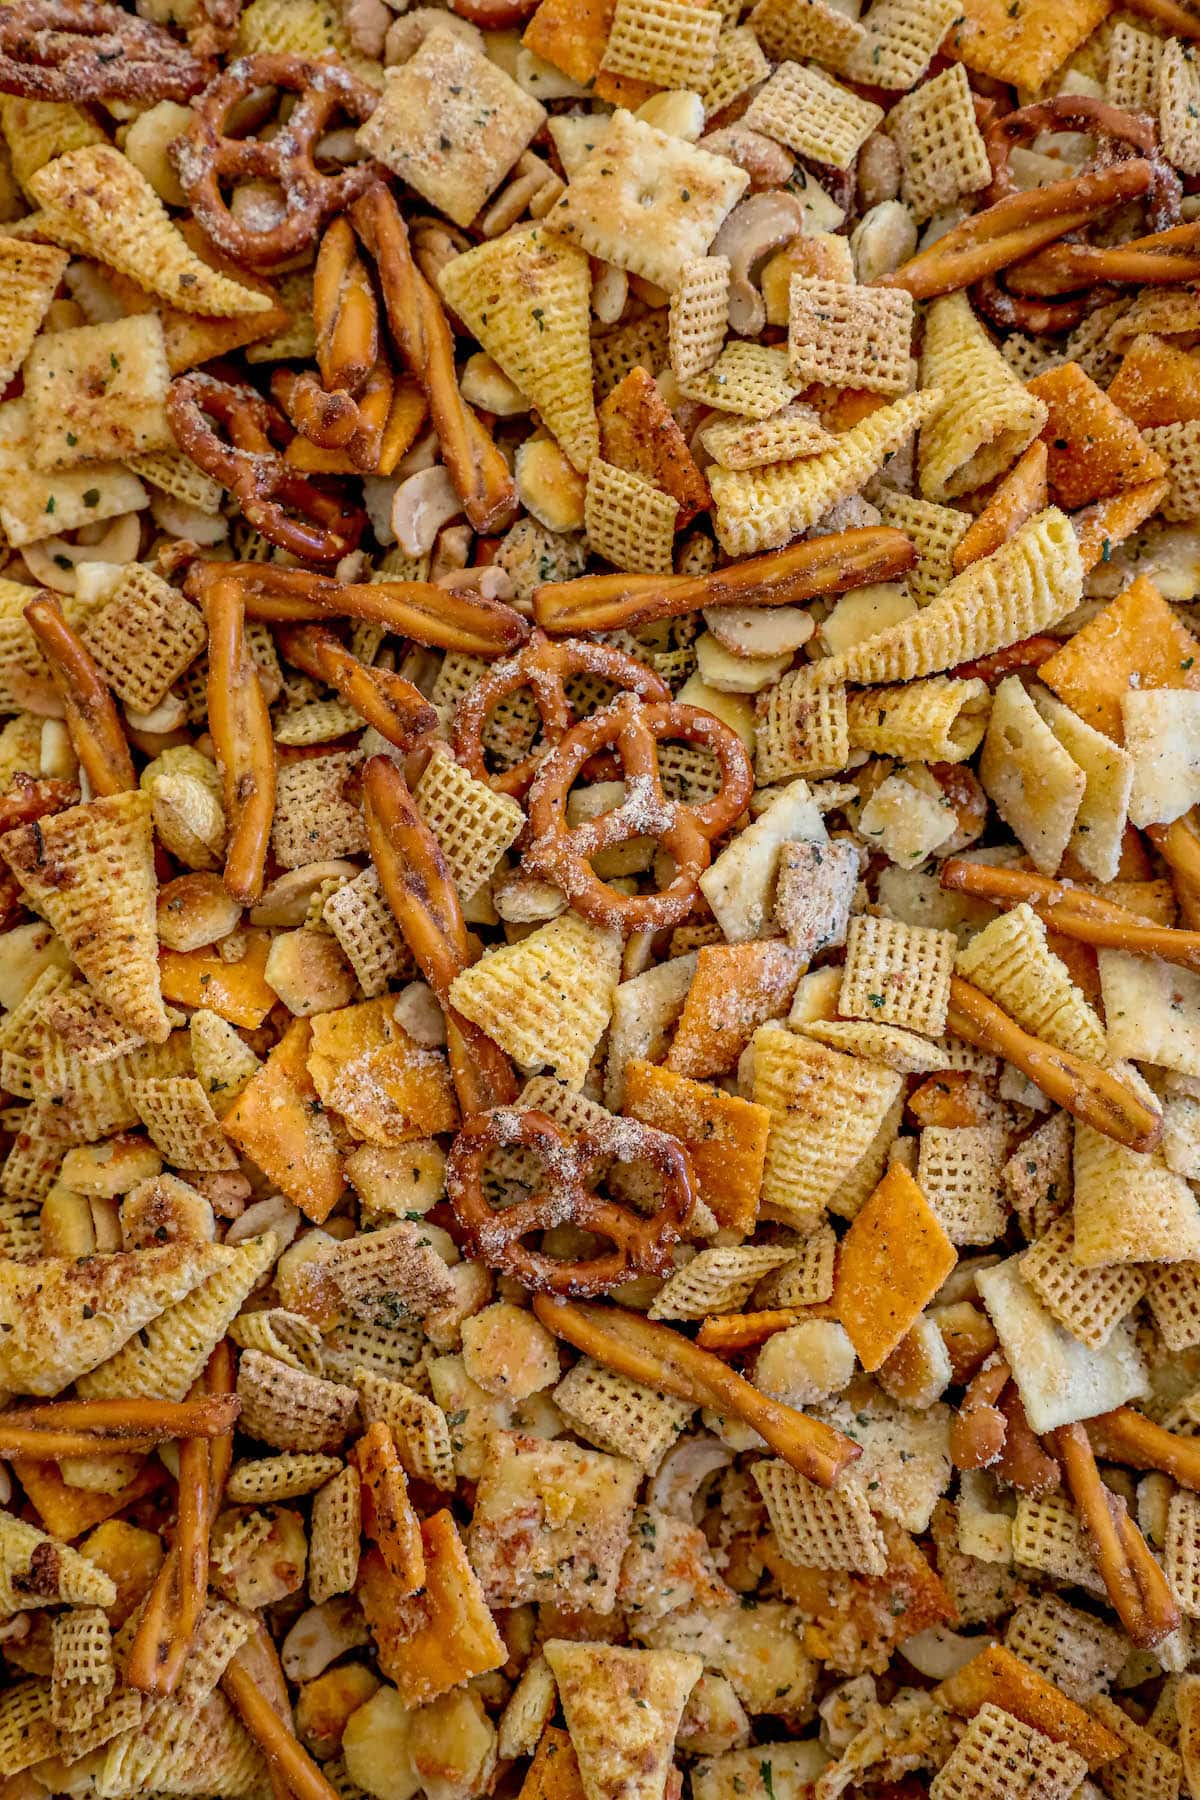 chex mix with pretzels, bugles, cheese crackers, and oyster crackers with ranch seasoning on a baking sheet